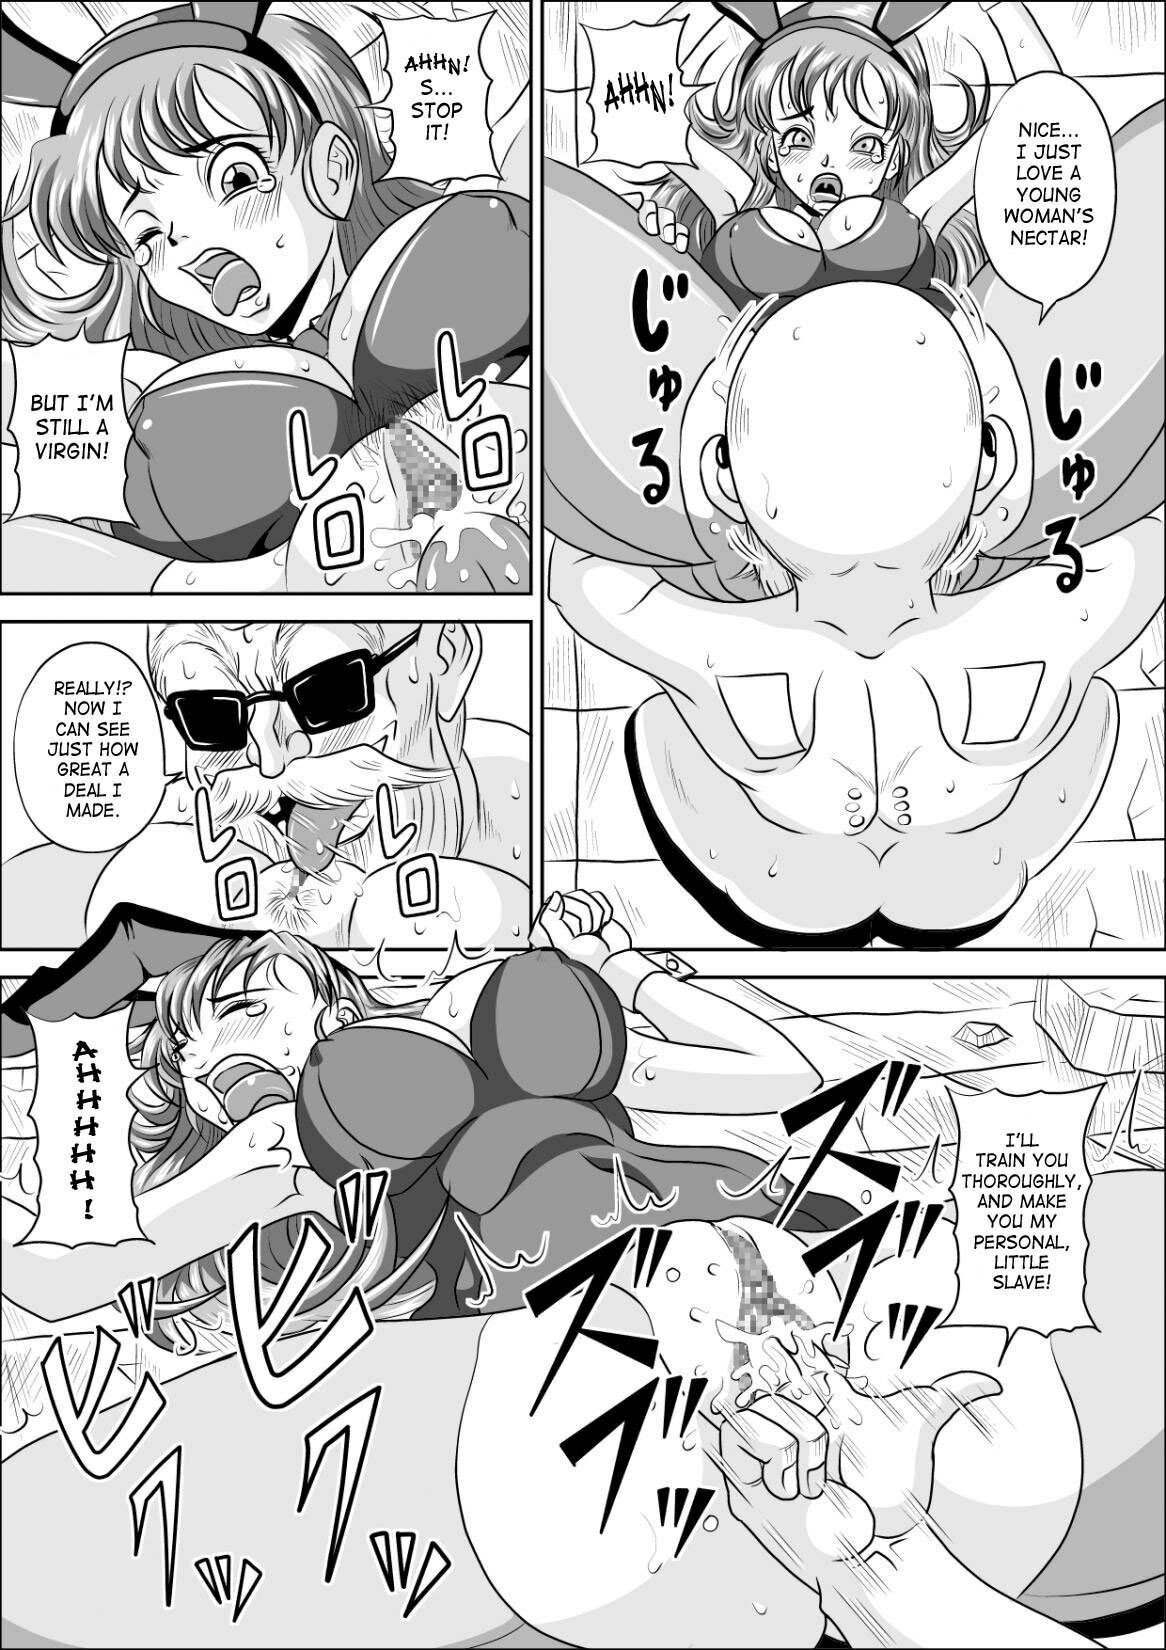 [Pyramid House] Sow in the Bunny (Dragon Ball) [English] {doujin-moe} page 13 full